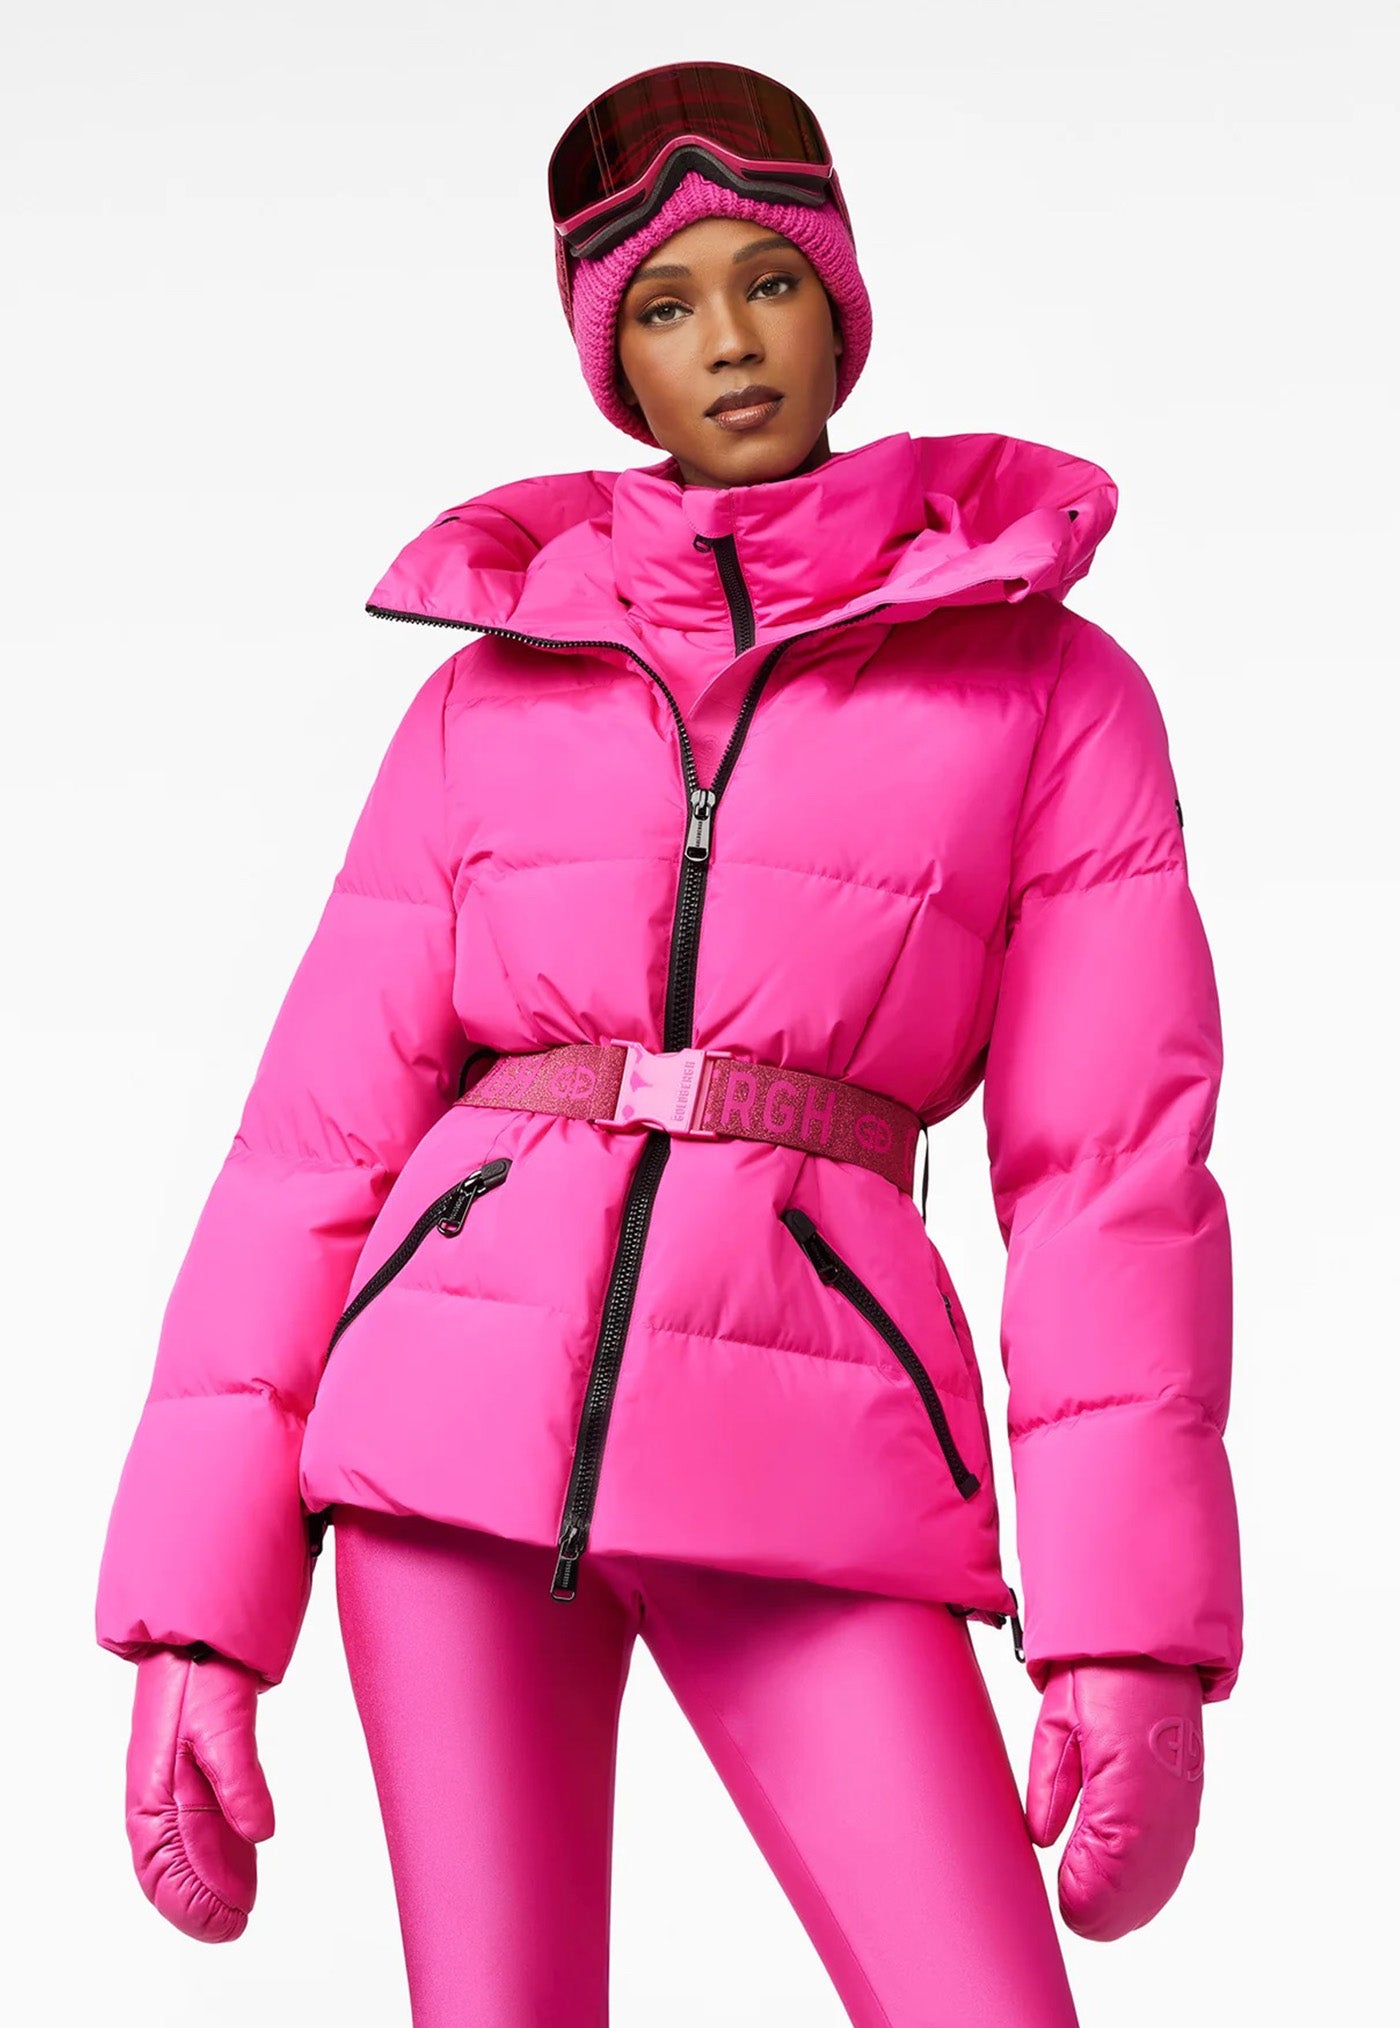 Snowmass Ski Jacket - Passion Pink sold by Angel Divine